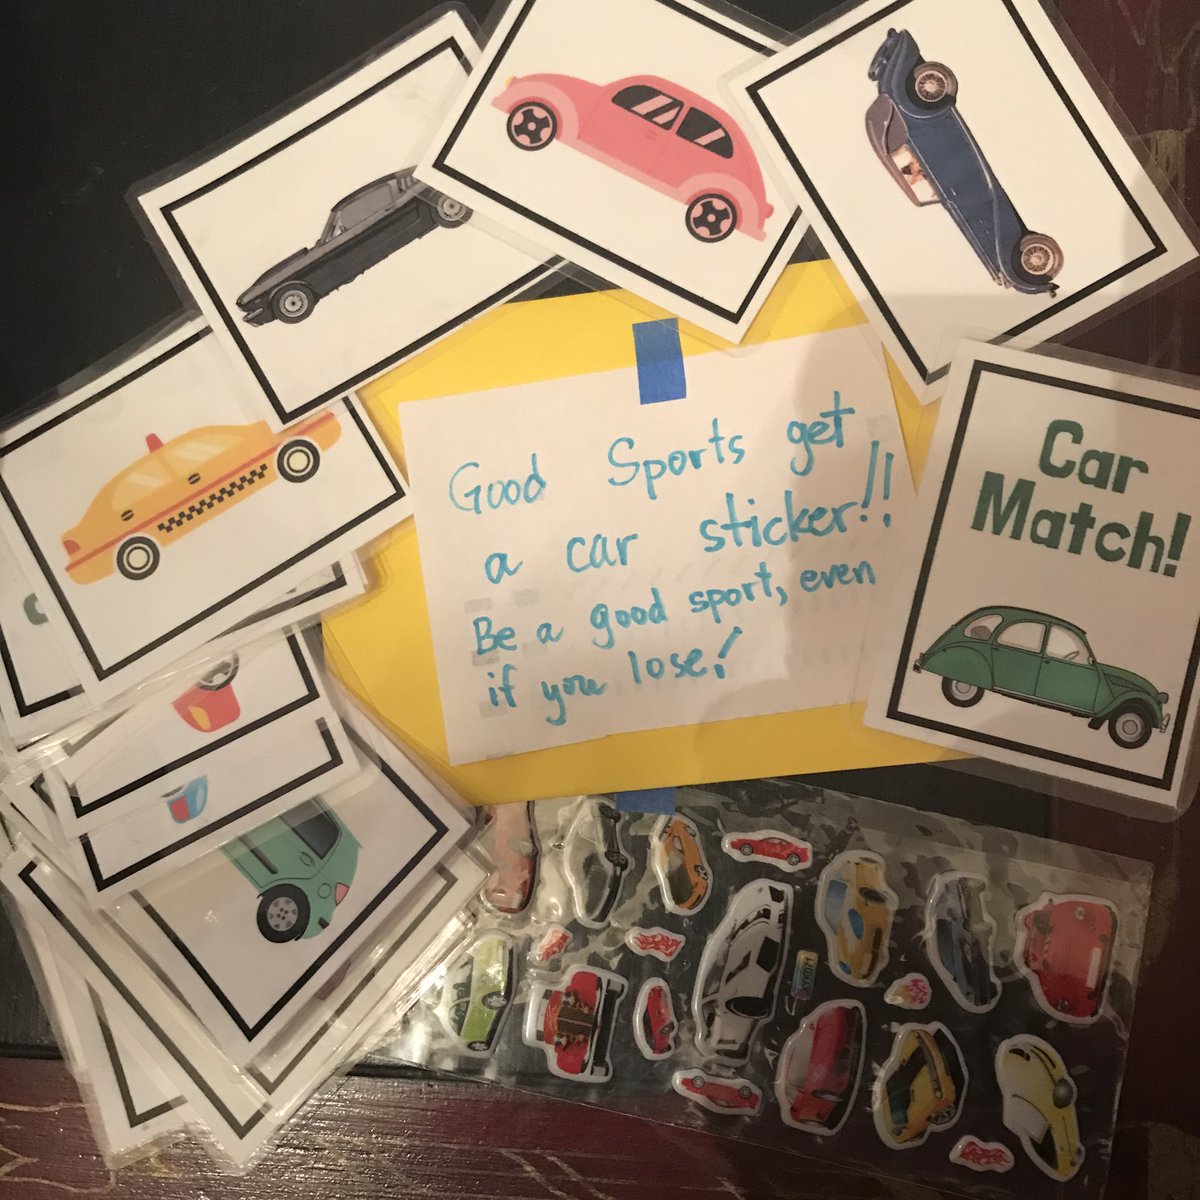 I know my kids need ways to be kind, be good sports, learn how to have and keep friends. So I made them games aimed at their interests. One kid likes donuts. I made a donut game. One likes space, he got a space game. The kid who plays cars every day got cars. (more)